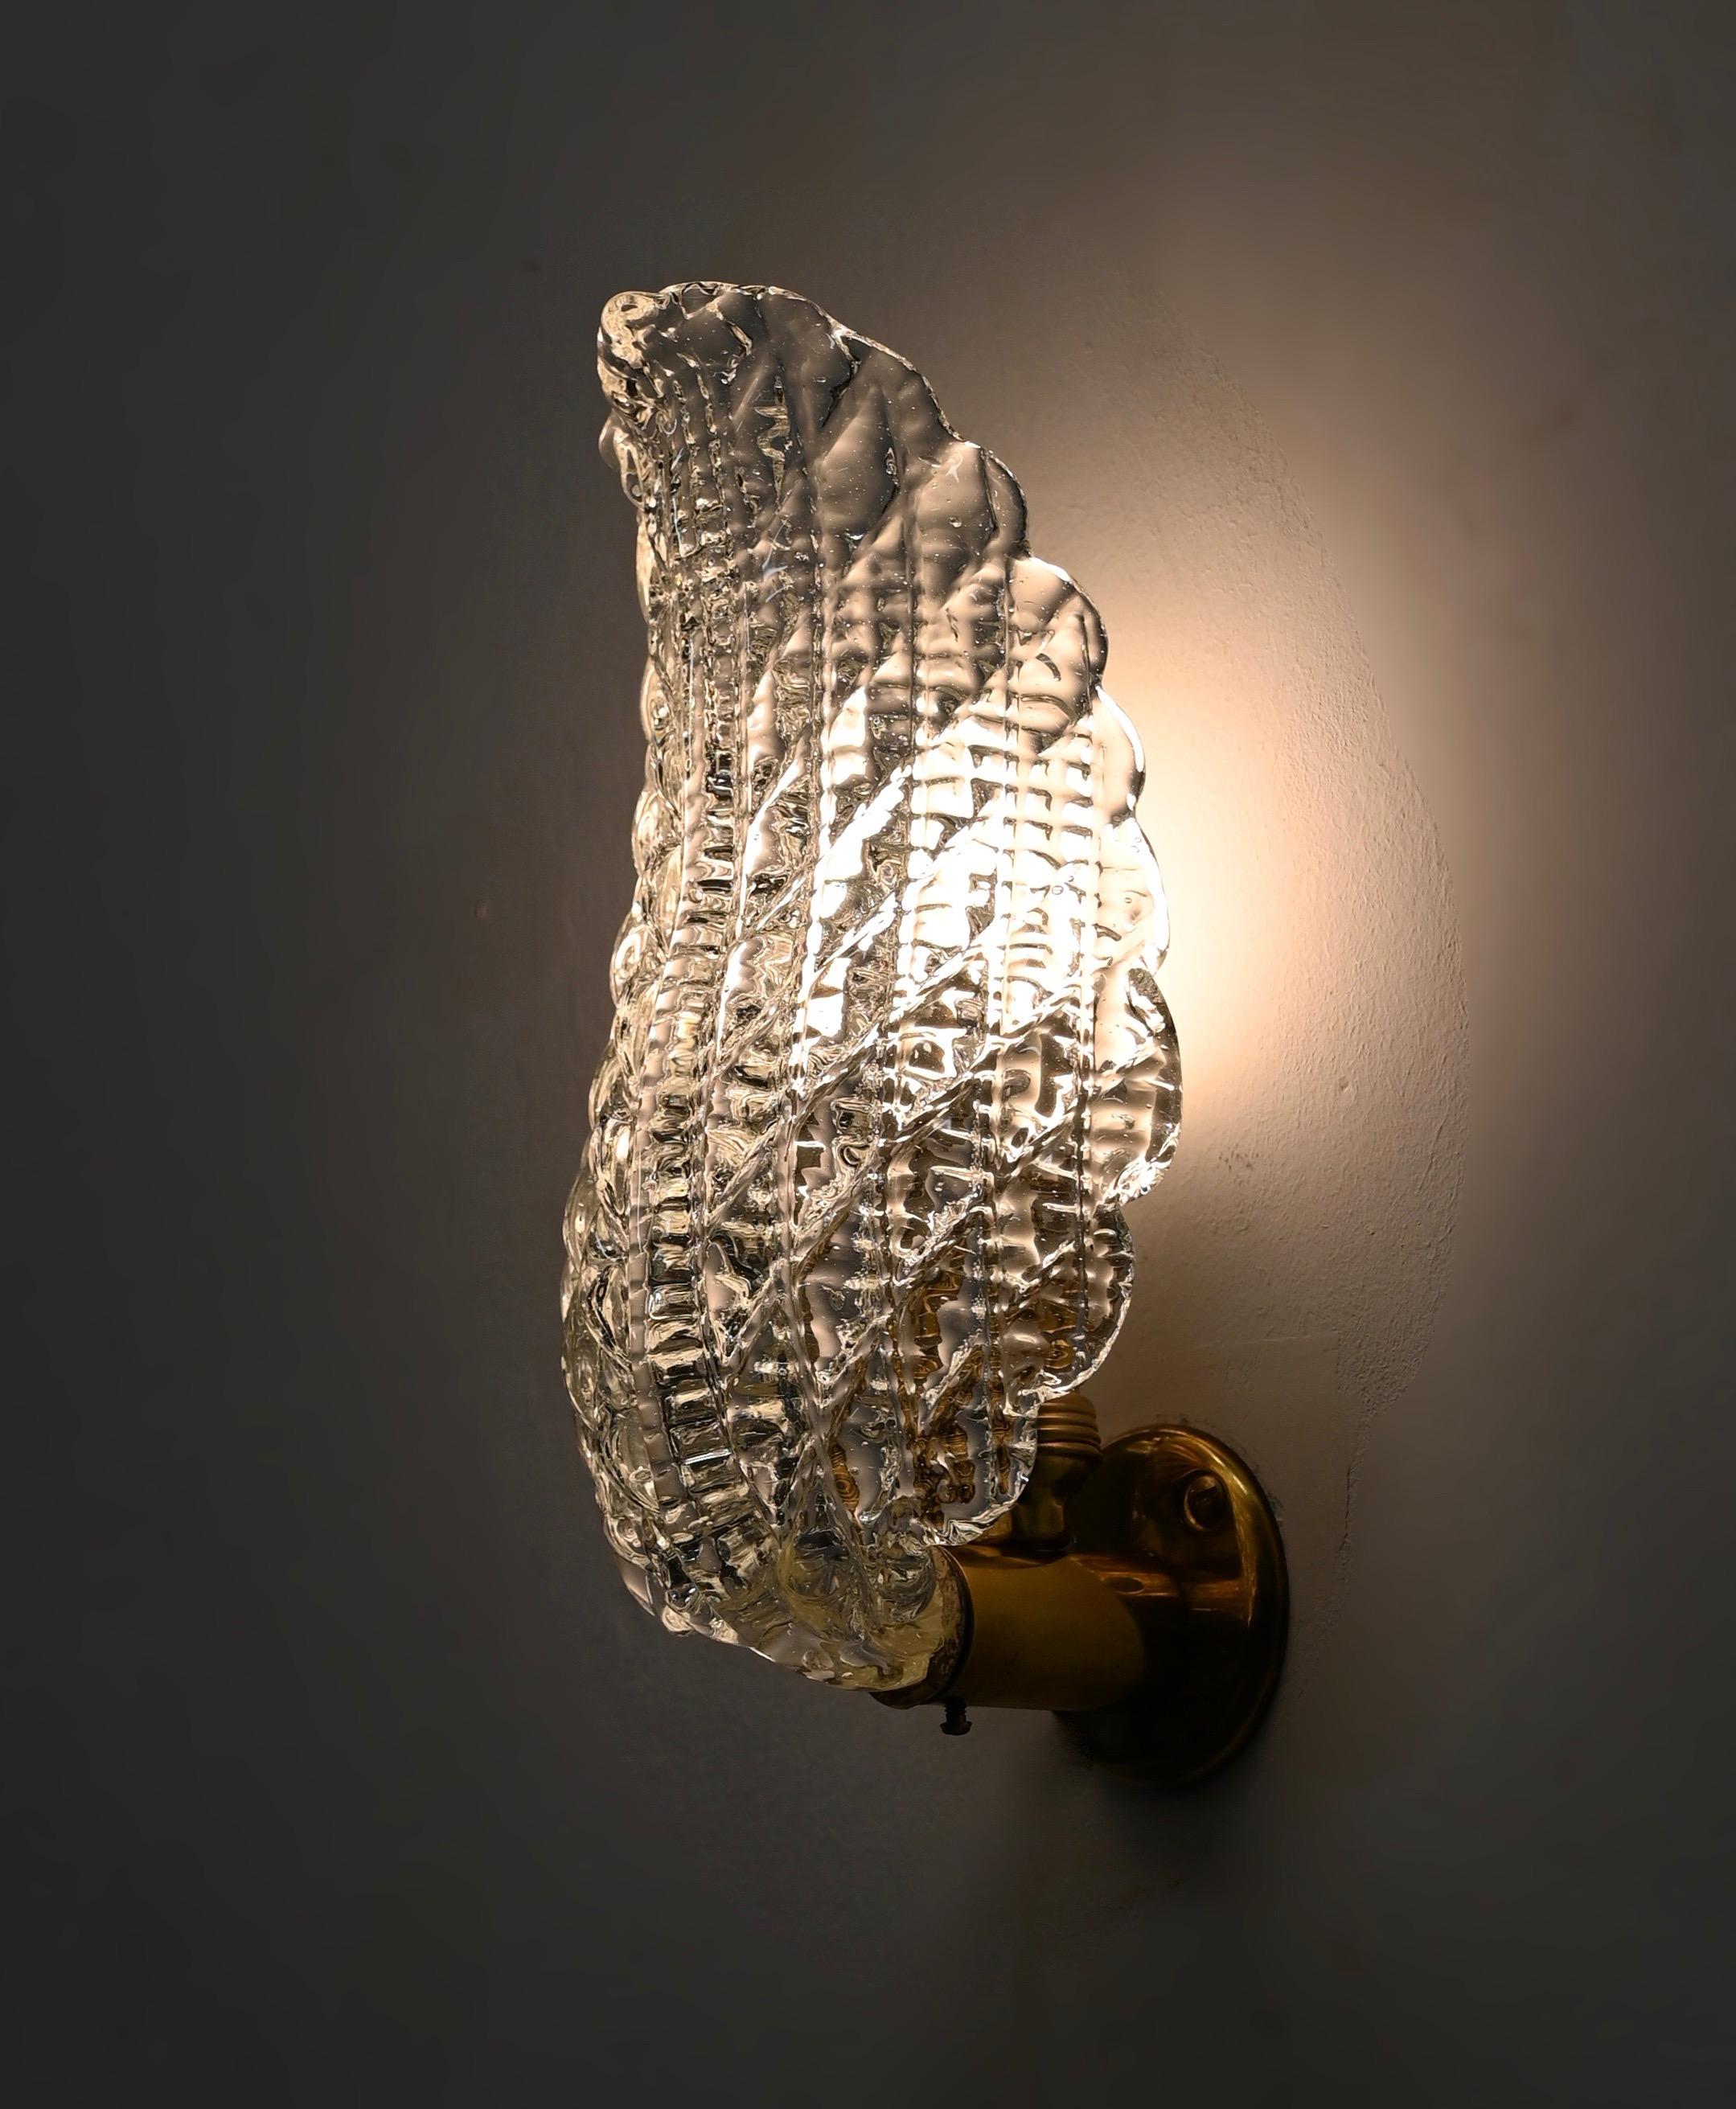 Pair of Midcentury Murano Glass and Brass Leaf Sconces, by Barovier, Italy 1950s For Sale 4